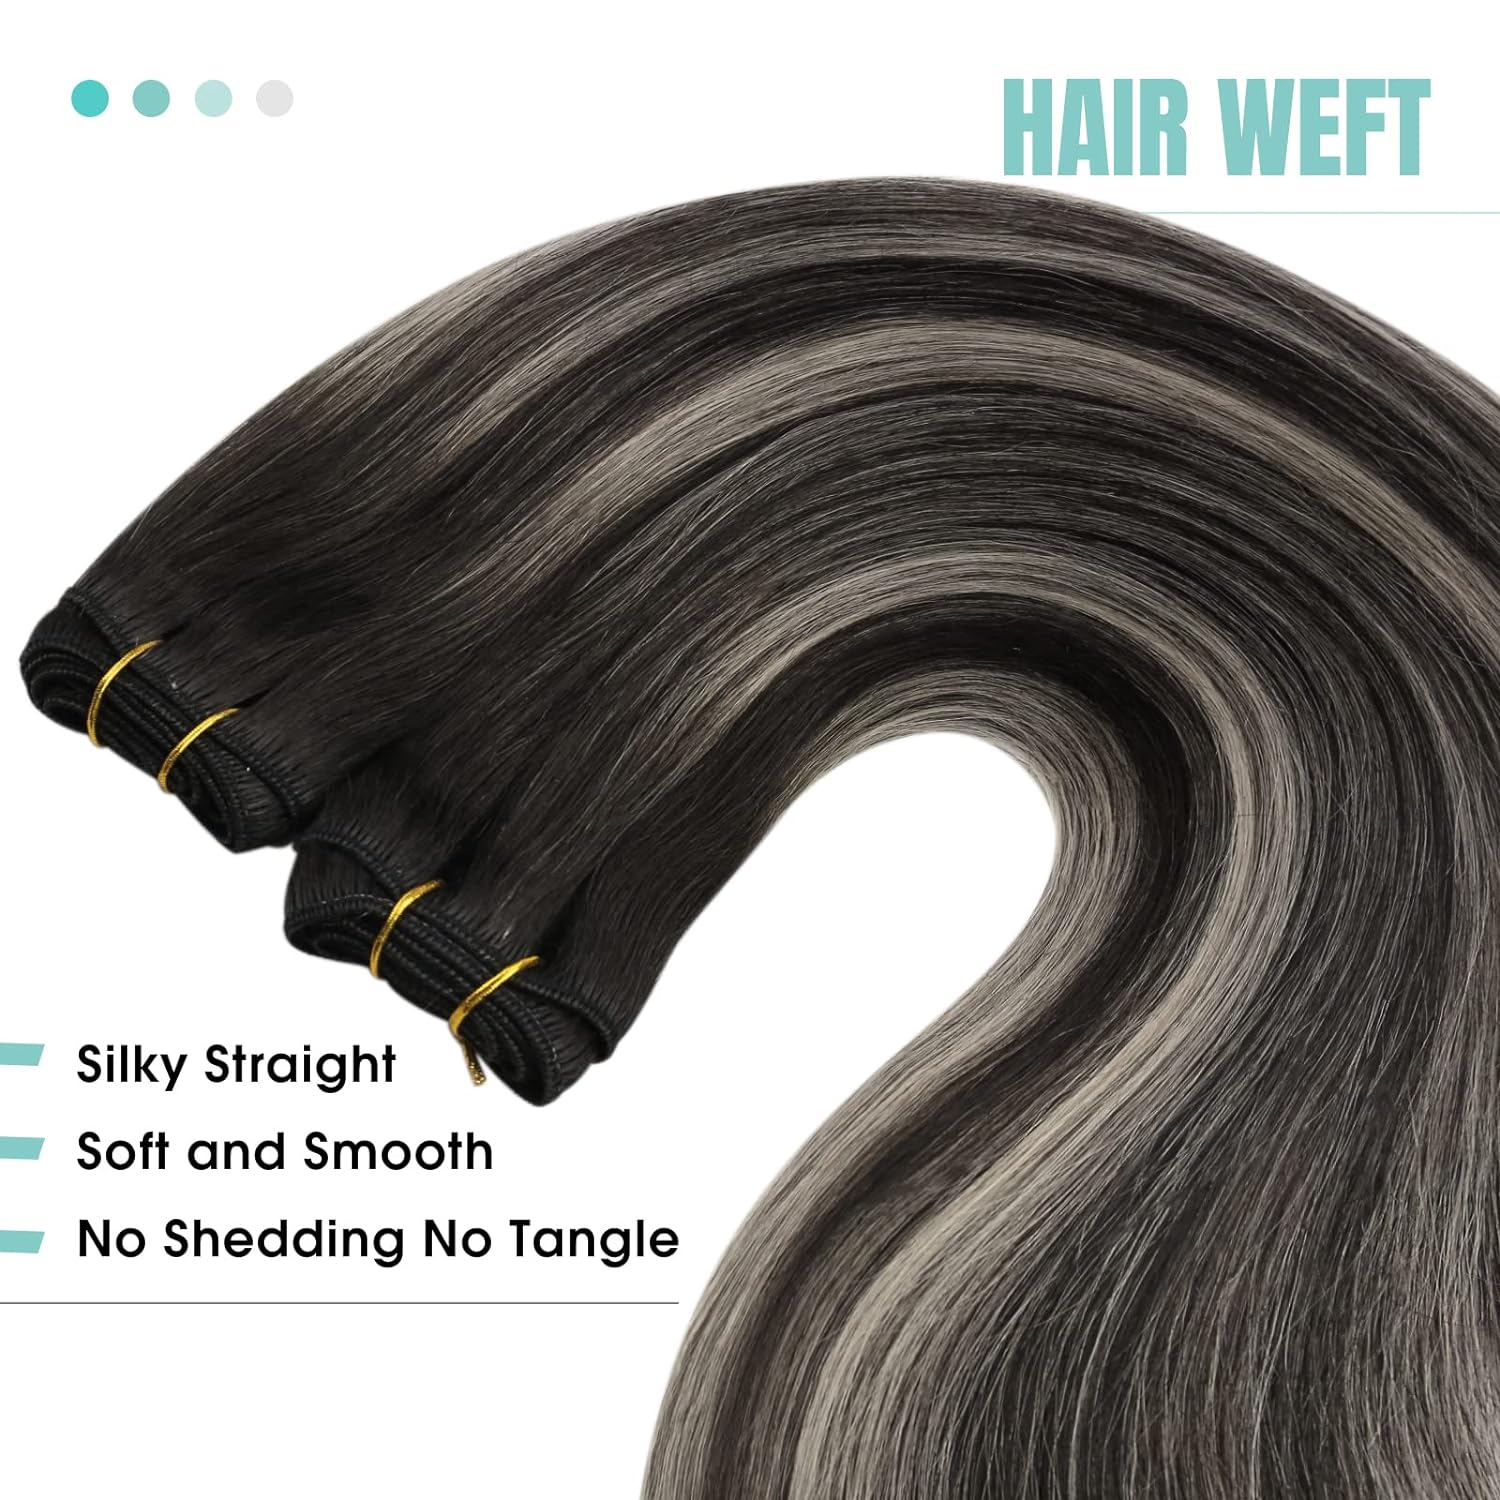 1B Natural Gray Human Hair Sew-In Weft Extensions Sew in Hair Extensions Ombre Black Weft Hair Extensions Human Hair Sew in Real Hair Extensions Blend of Black and Silver with Black Roots Weft Hair.